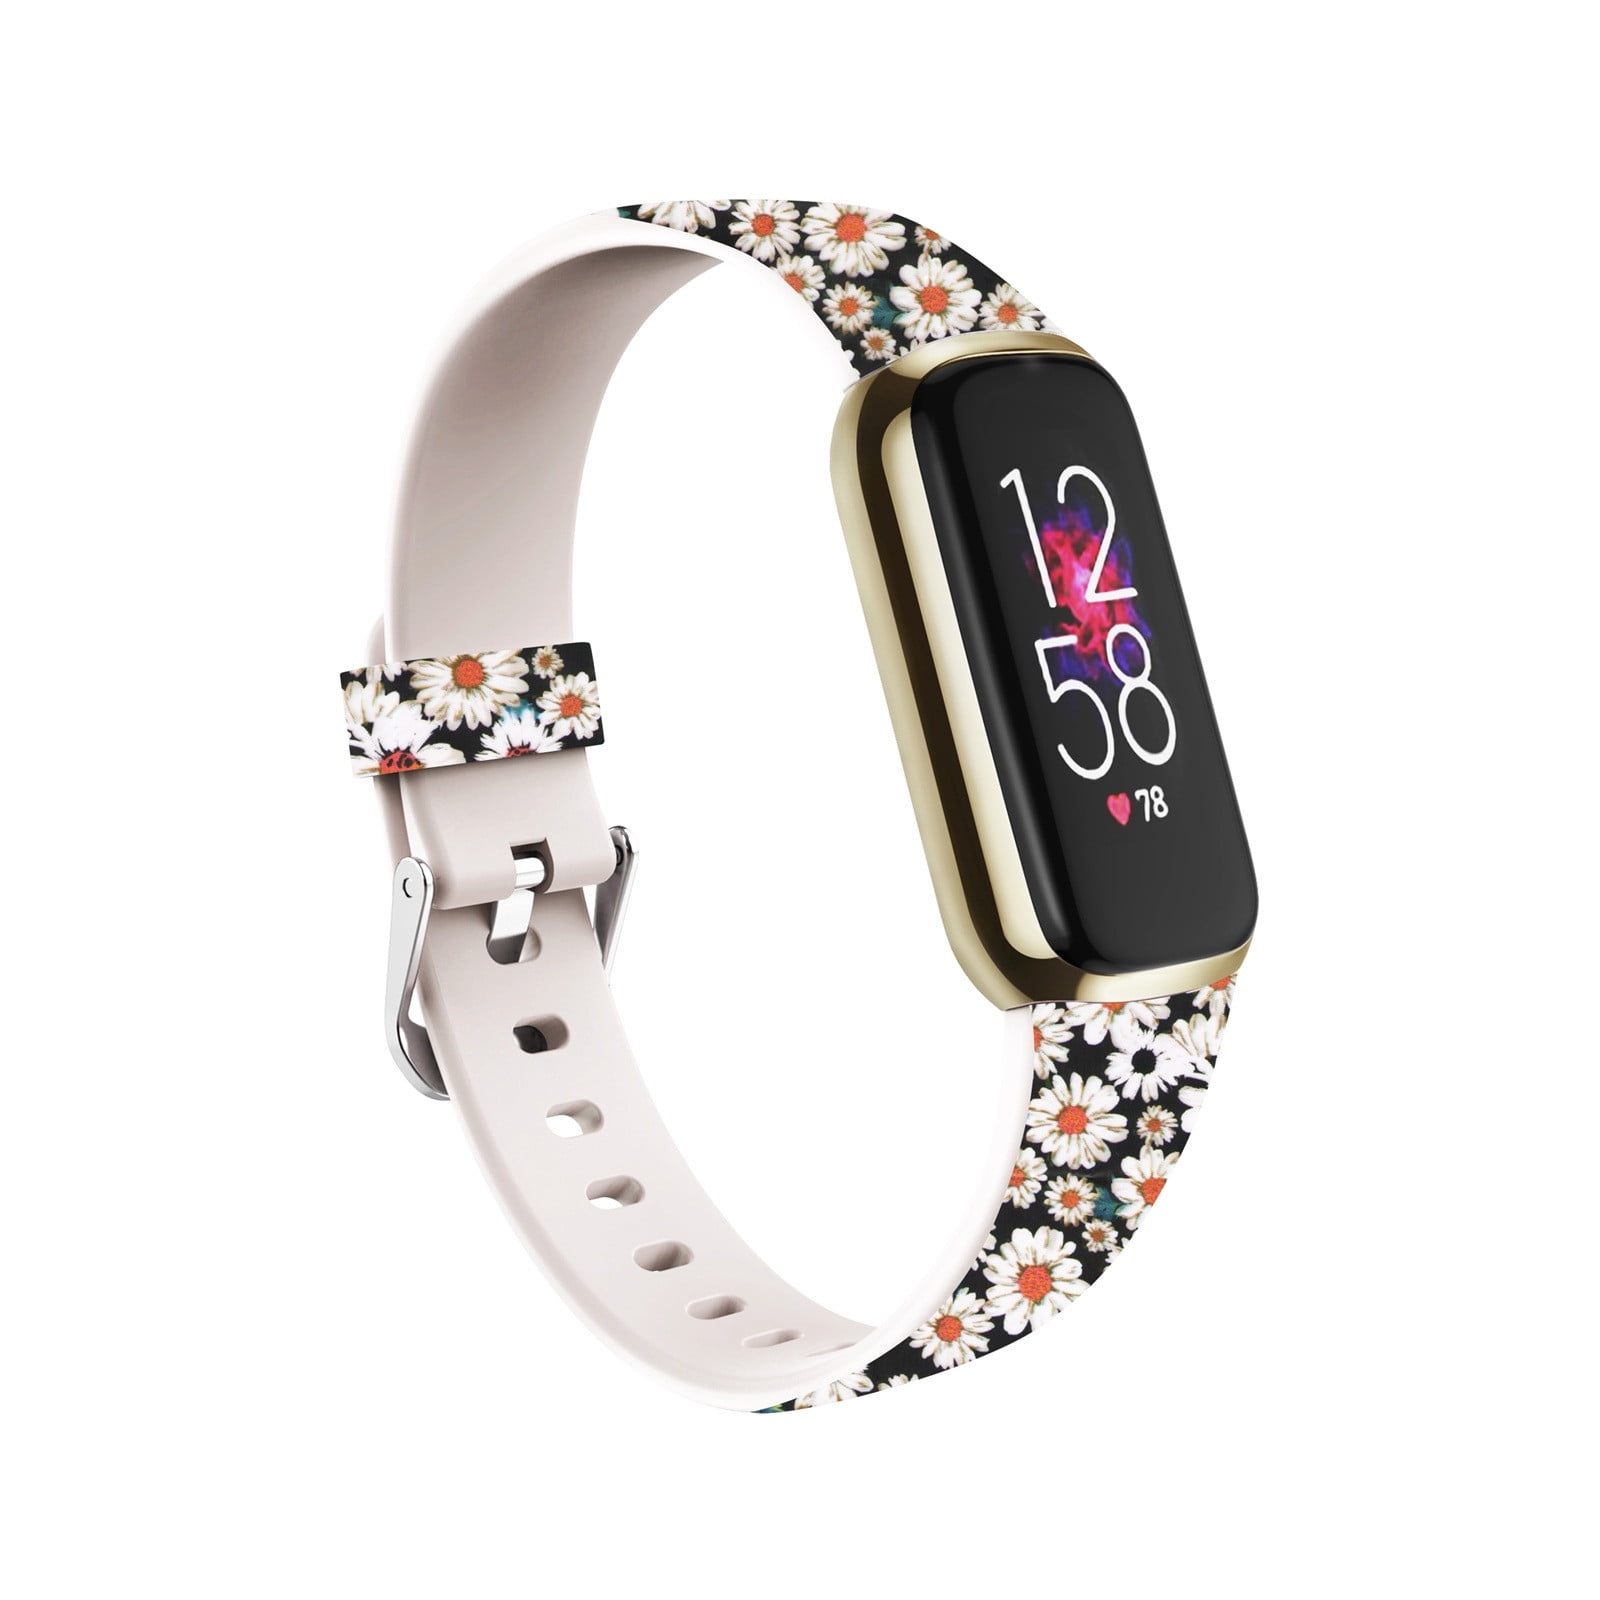 Yawots Sport Band Compatible with Fitbit Luxe, Floral Silicone Printed ...